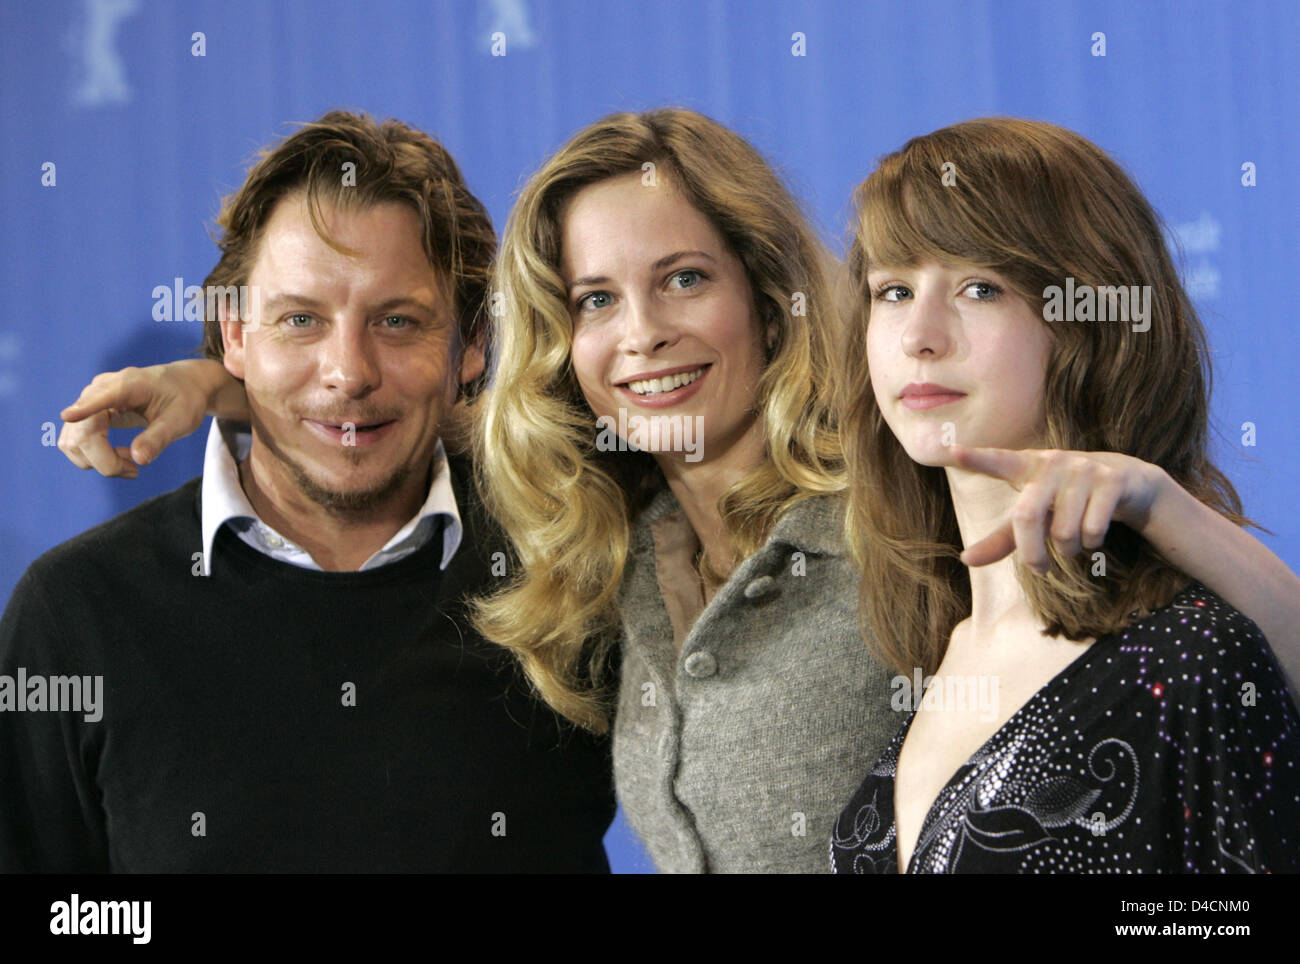 Danish actors Anders W. Berthelsen (L) and Sarah Juel Werner (R) are pictured with their Norwegian colleague Maria Bonnevie during a photo call for the film 'What No One Knows' (Det som ingen ved) at the 58th Berlin International Film Festival in Berlin, 11 February 2008. The film runs in the Panorama Section at the 58th Berlin Film Festival. Photo: JOERG CARSTENSEN Stock Photo